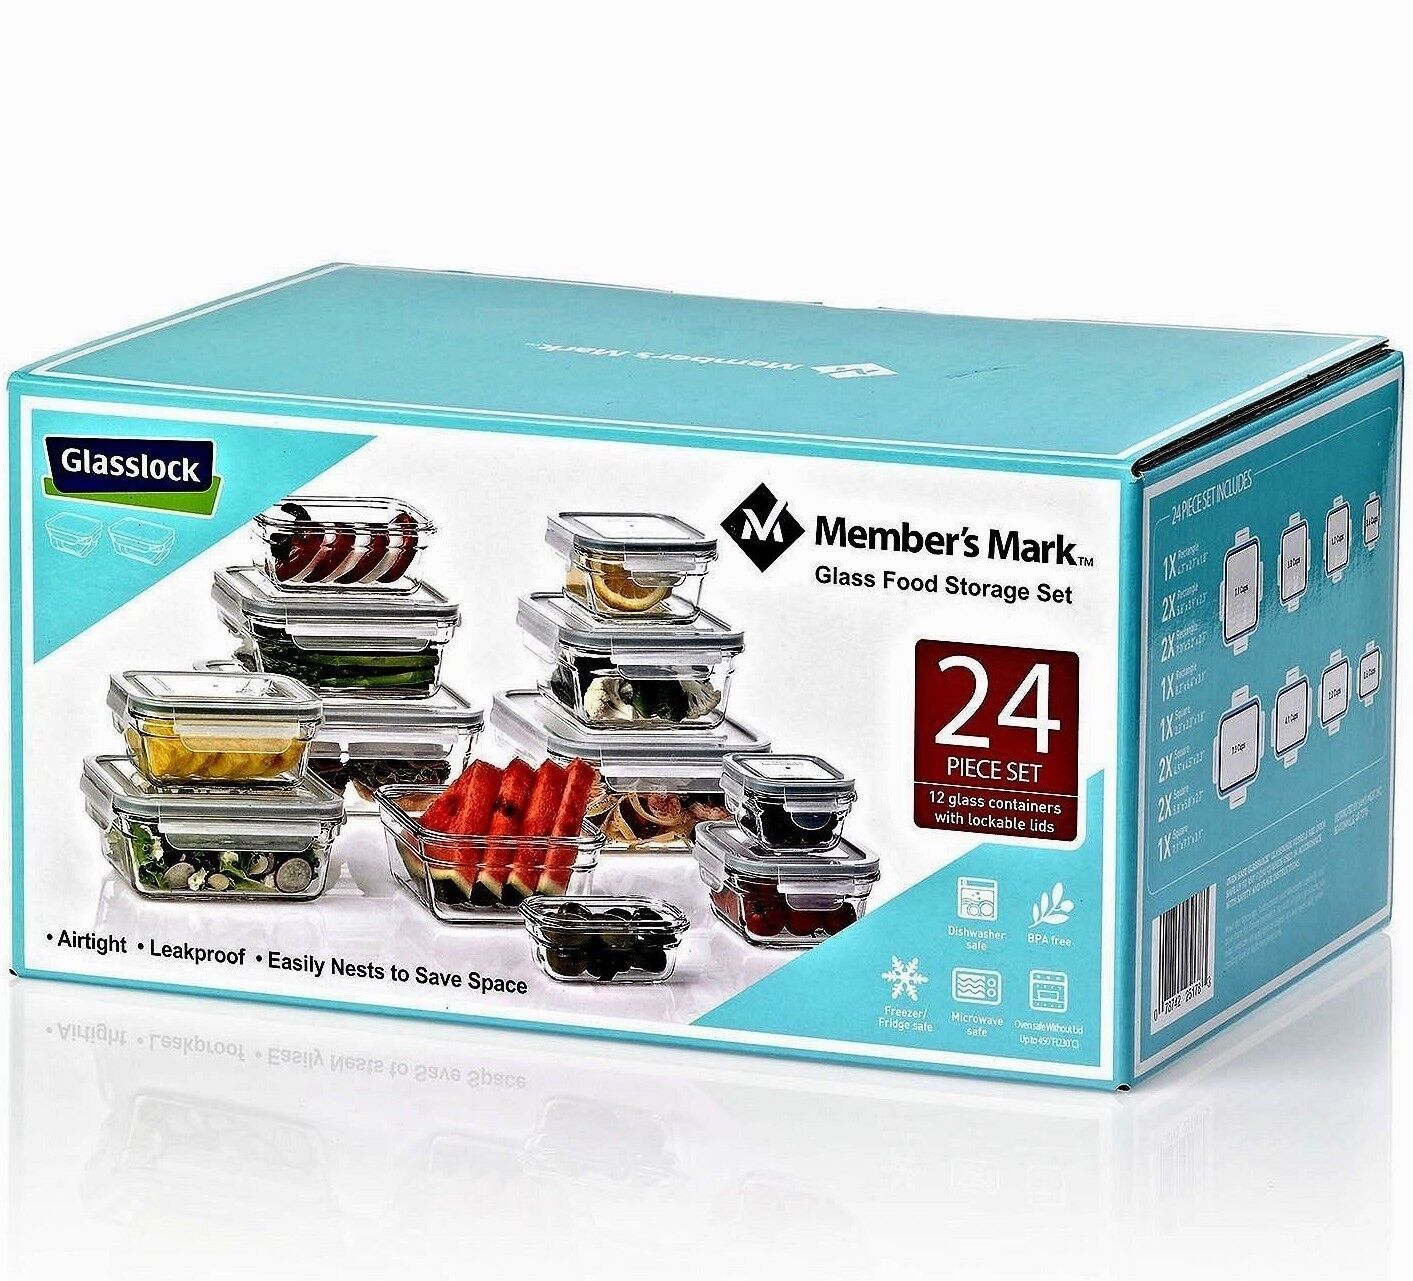 Member's Mark 24-Piece Glass Food Storage and 50 similar items